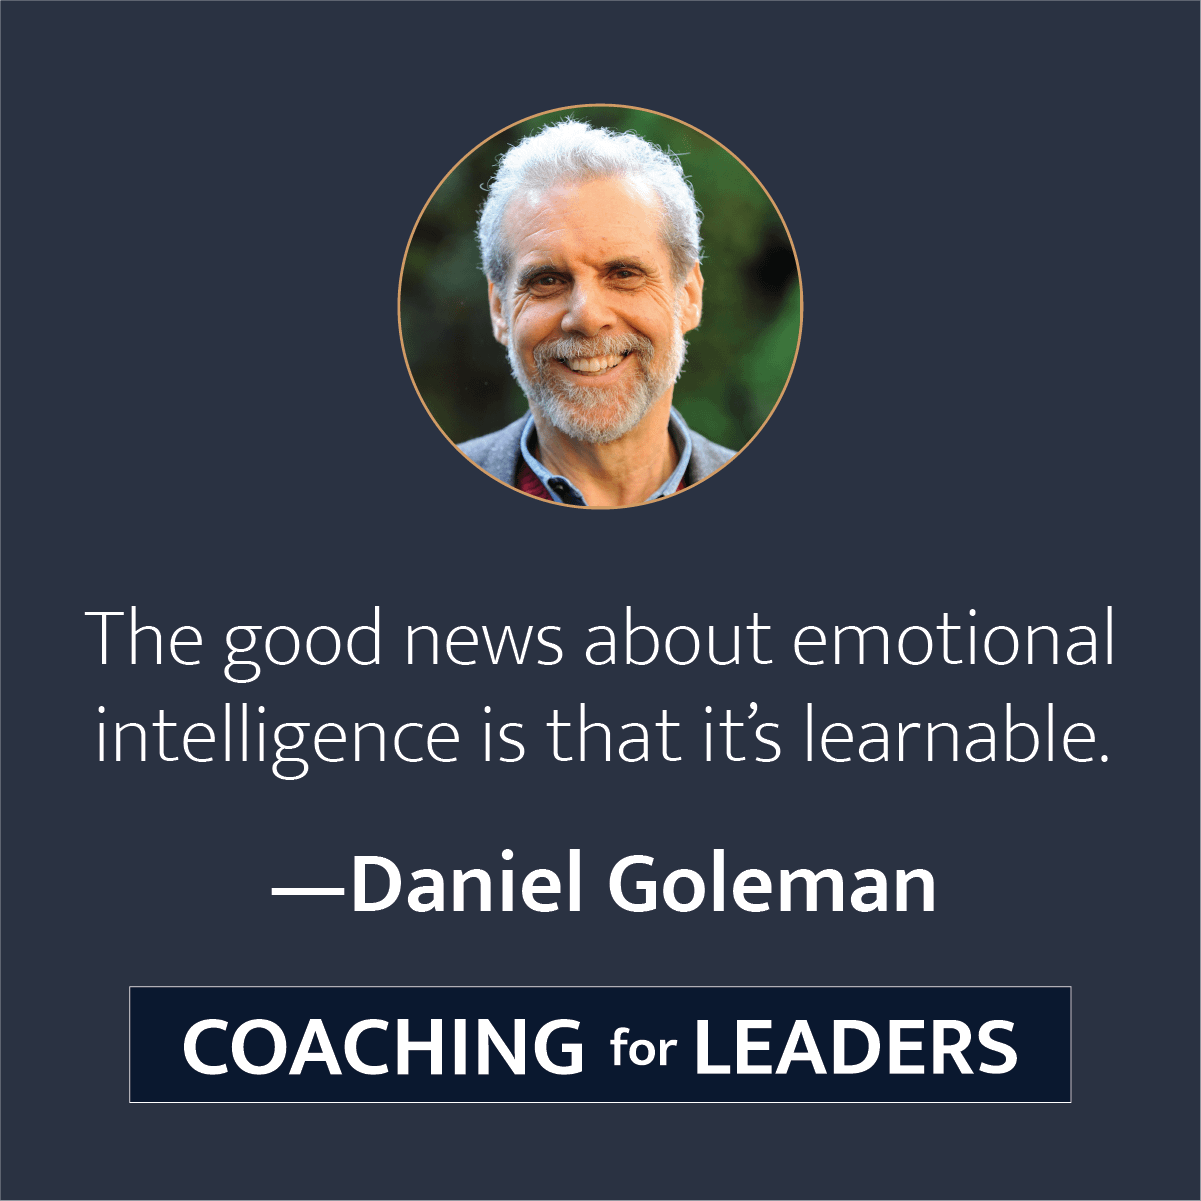 The good news about emotional intelligence is that it's learnable.